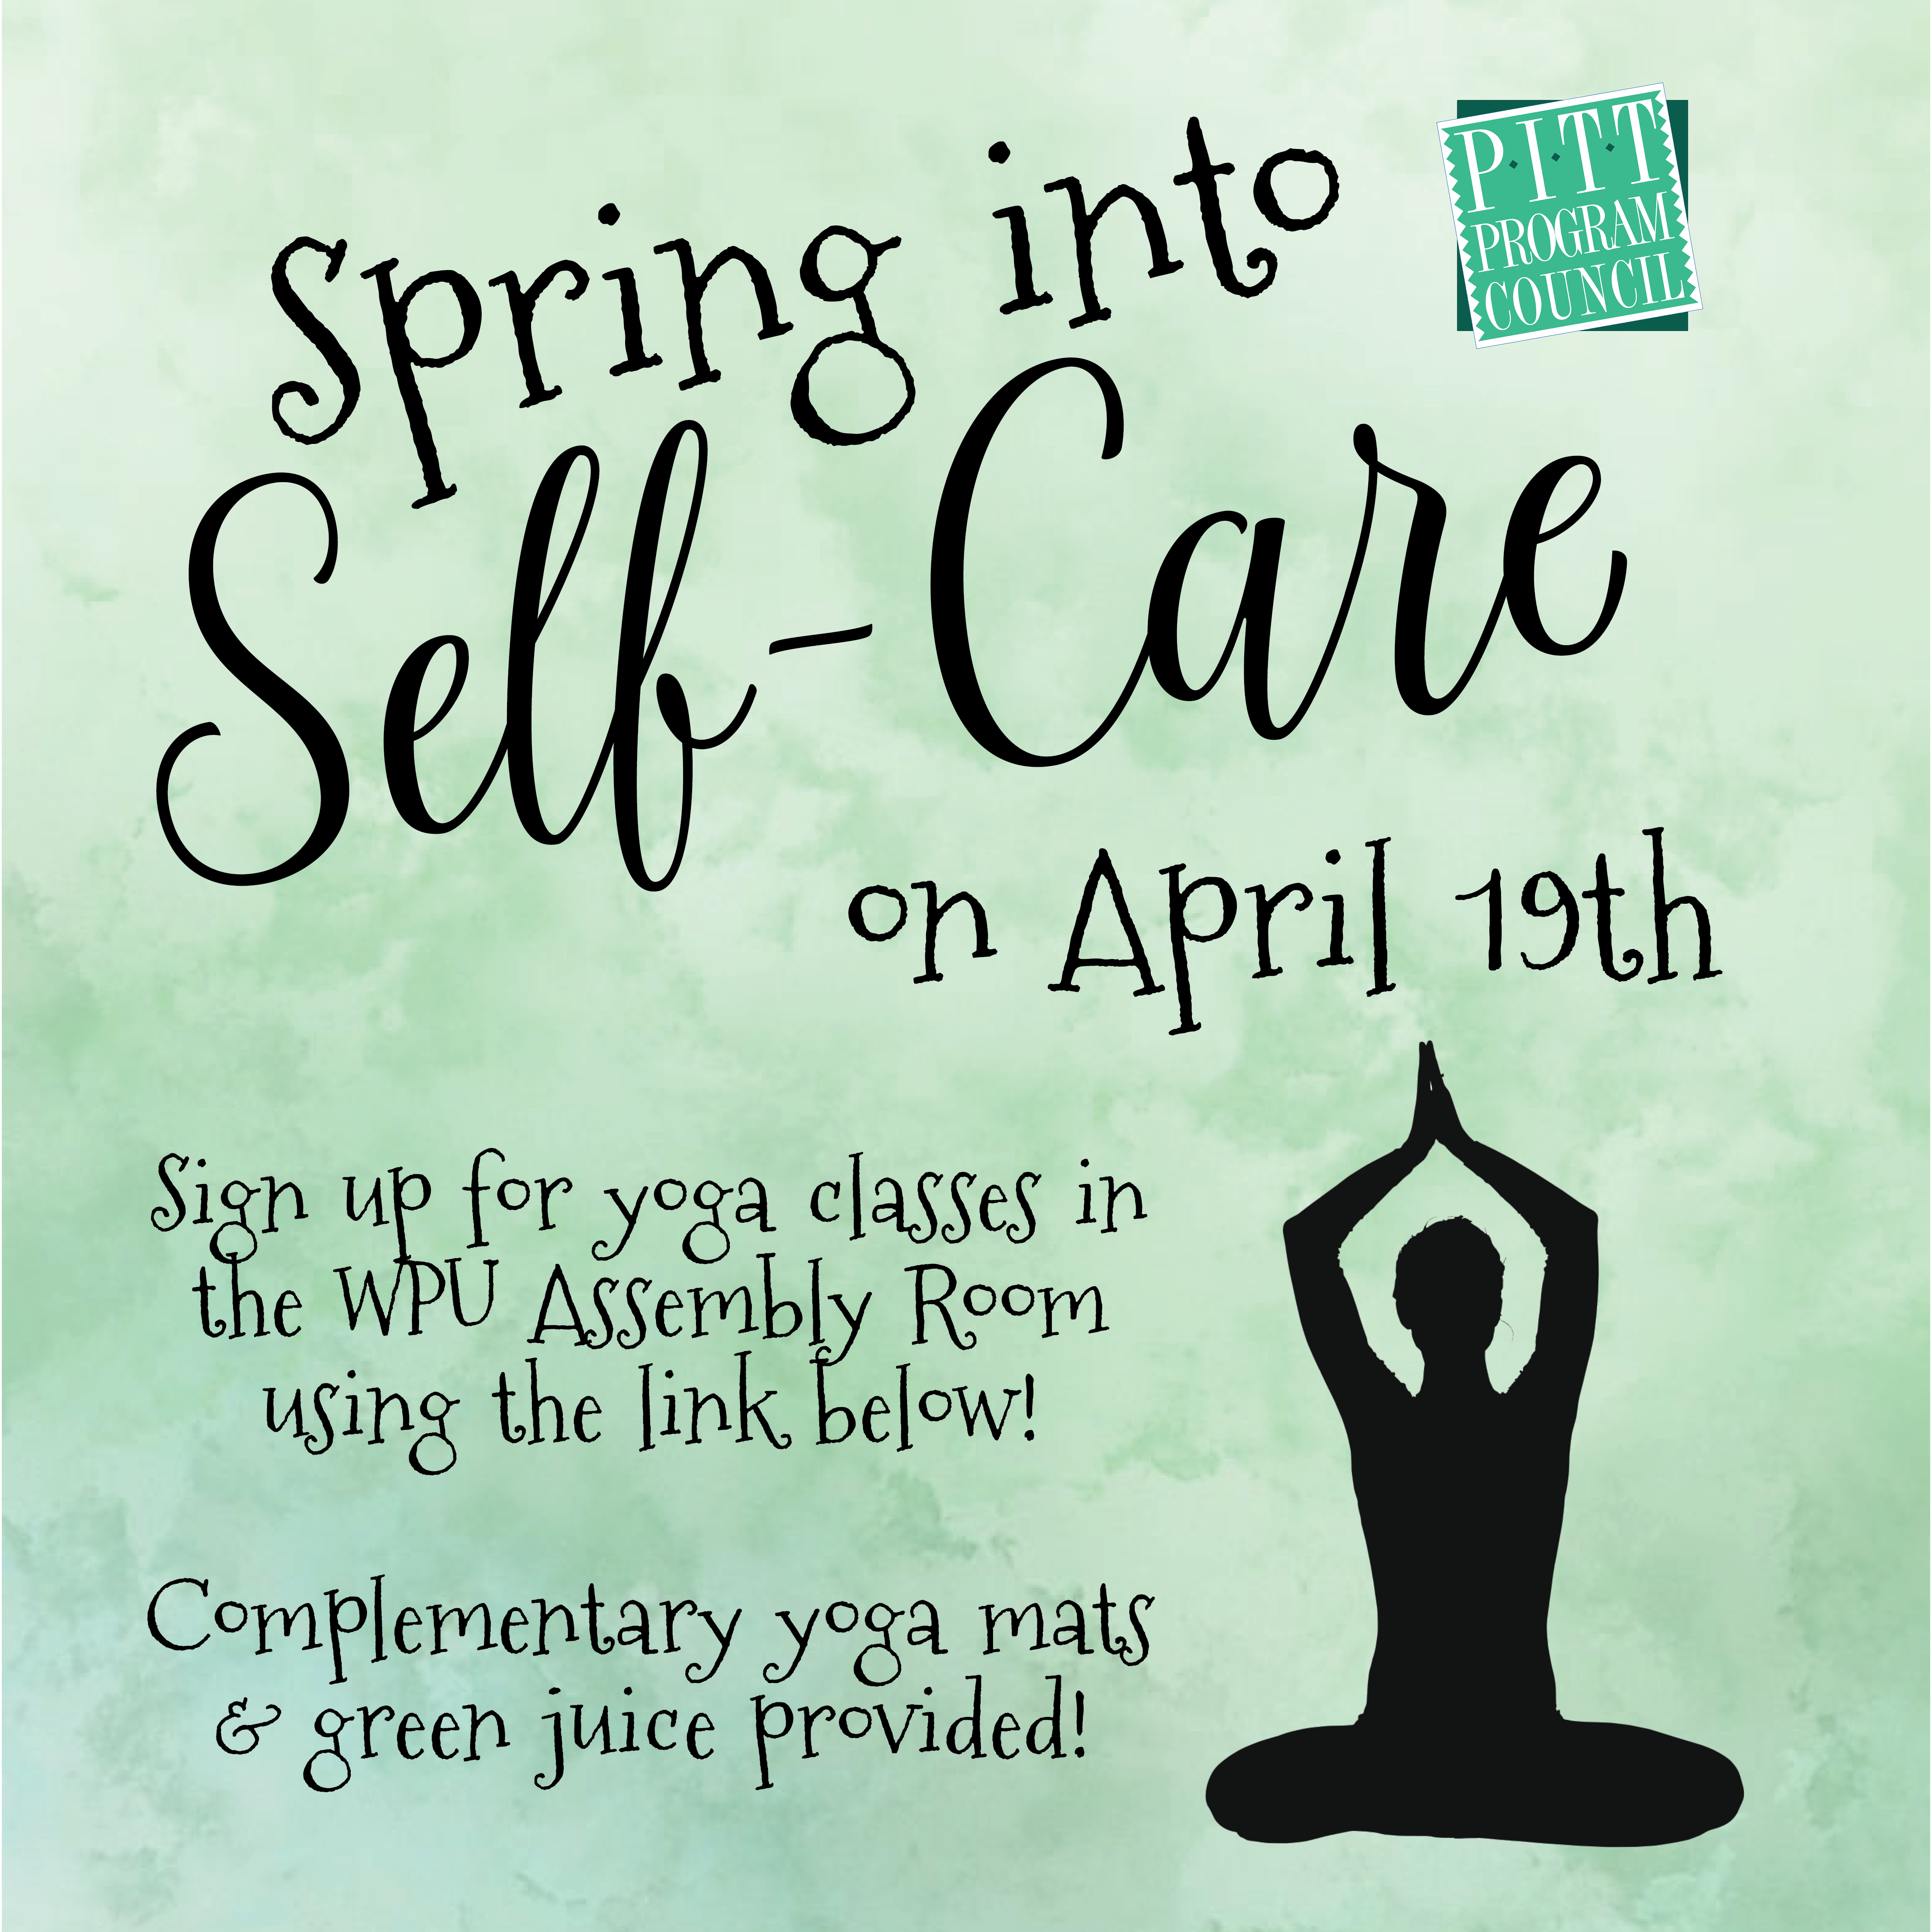 Spring in-to Self Care